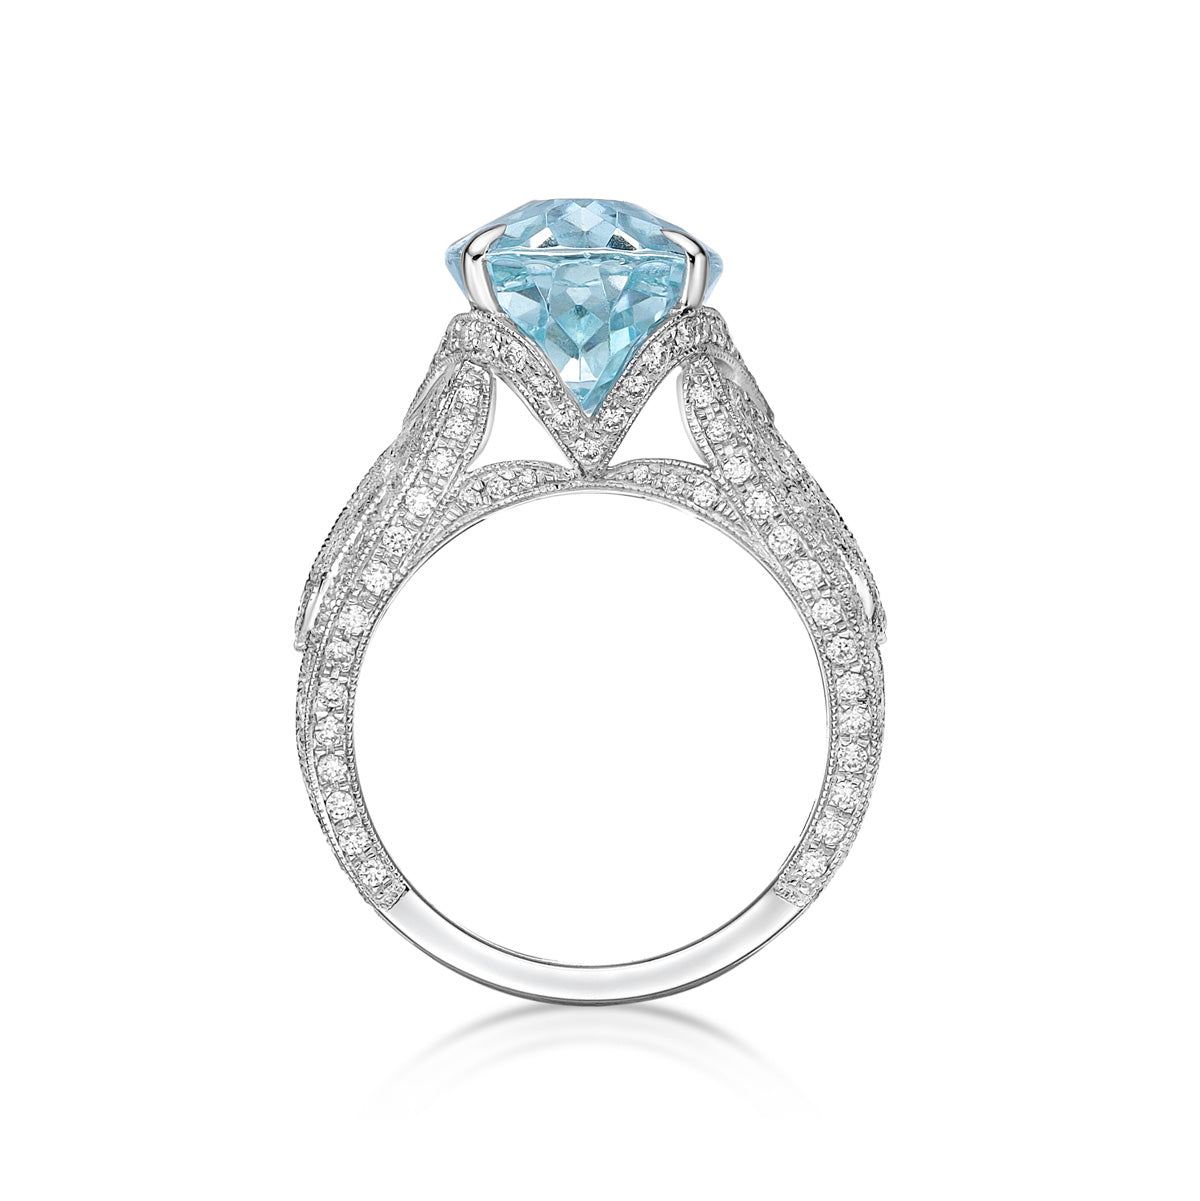 7.85ct Elongated Oval Aquamarine in a bespoke handmade Vintage-style 18K white gold cocktail ring setting with hand-milgrain detailing